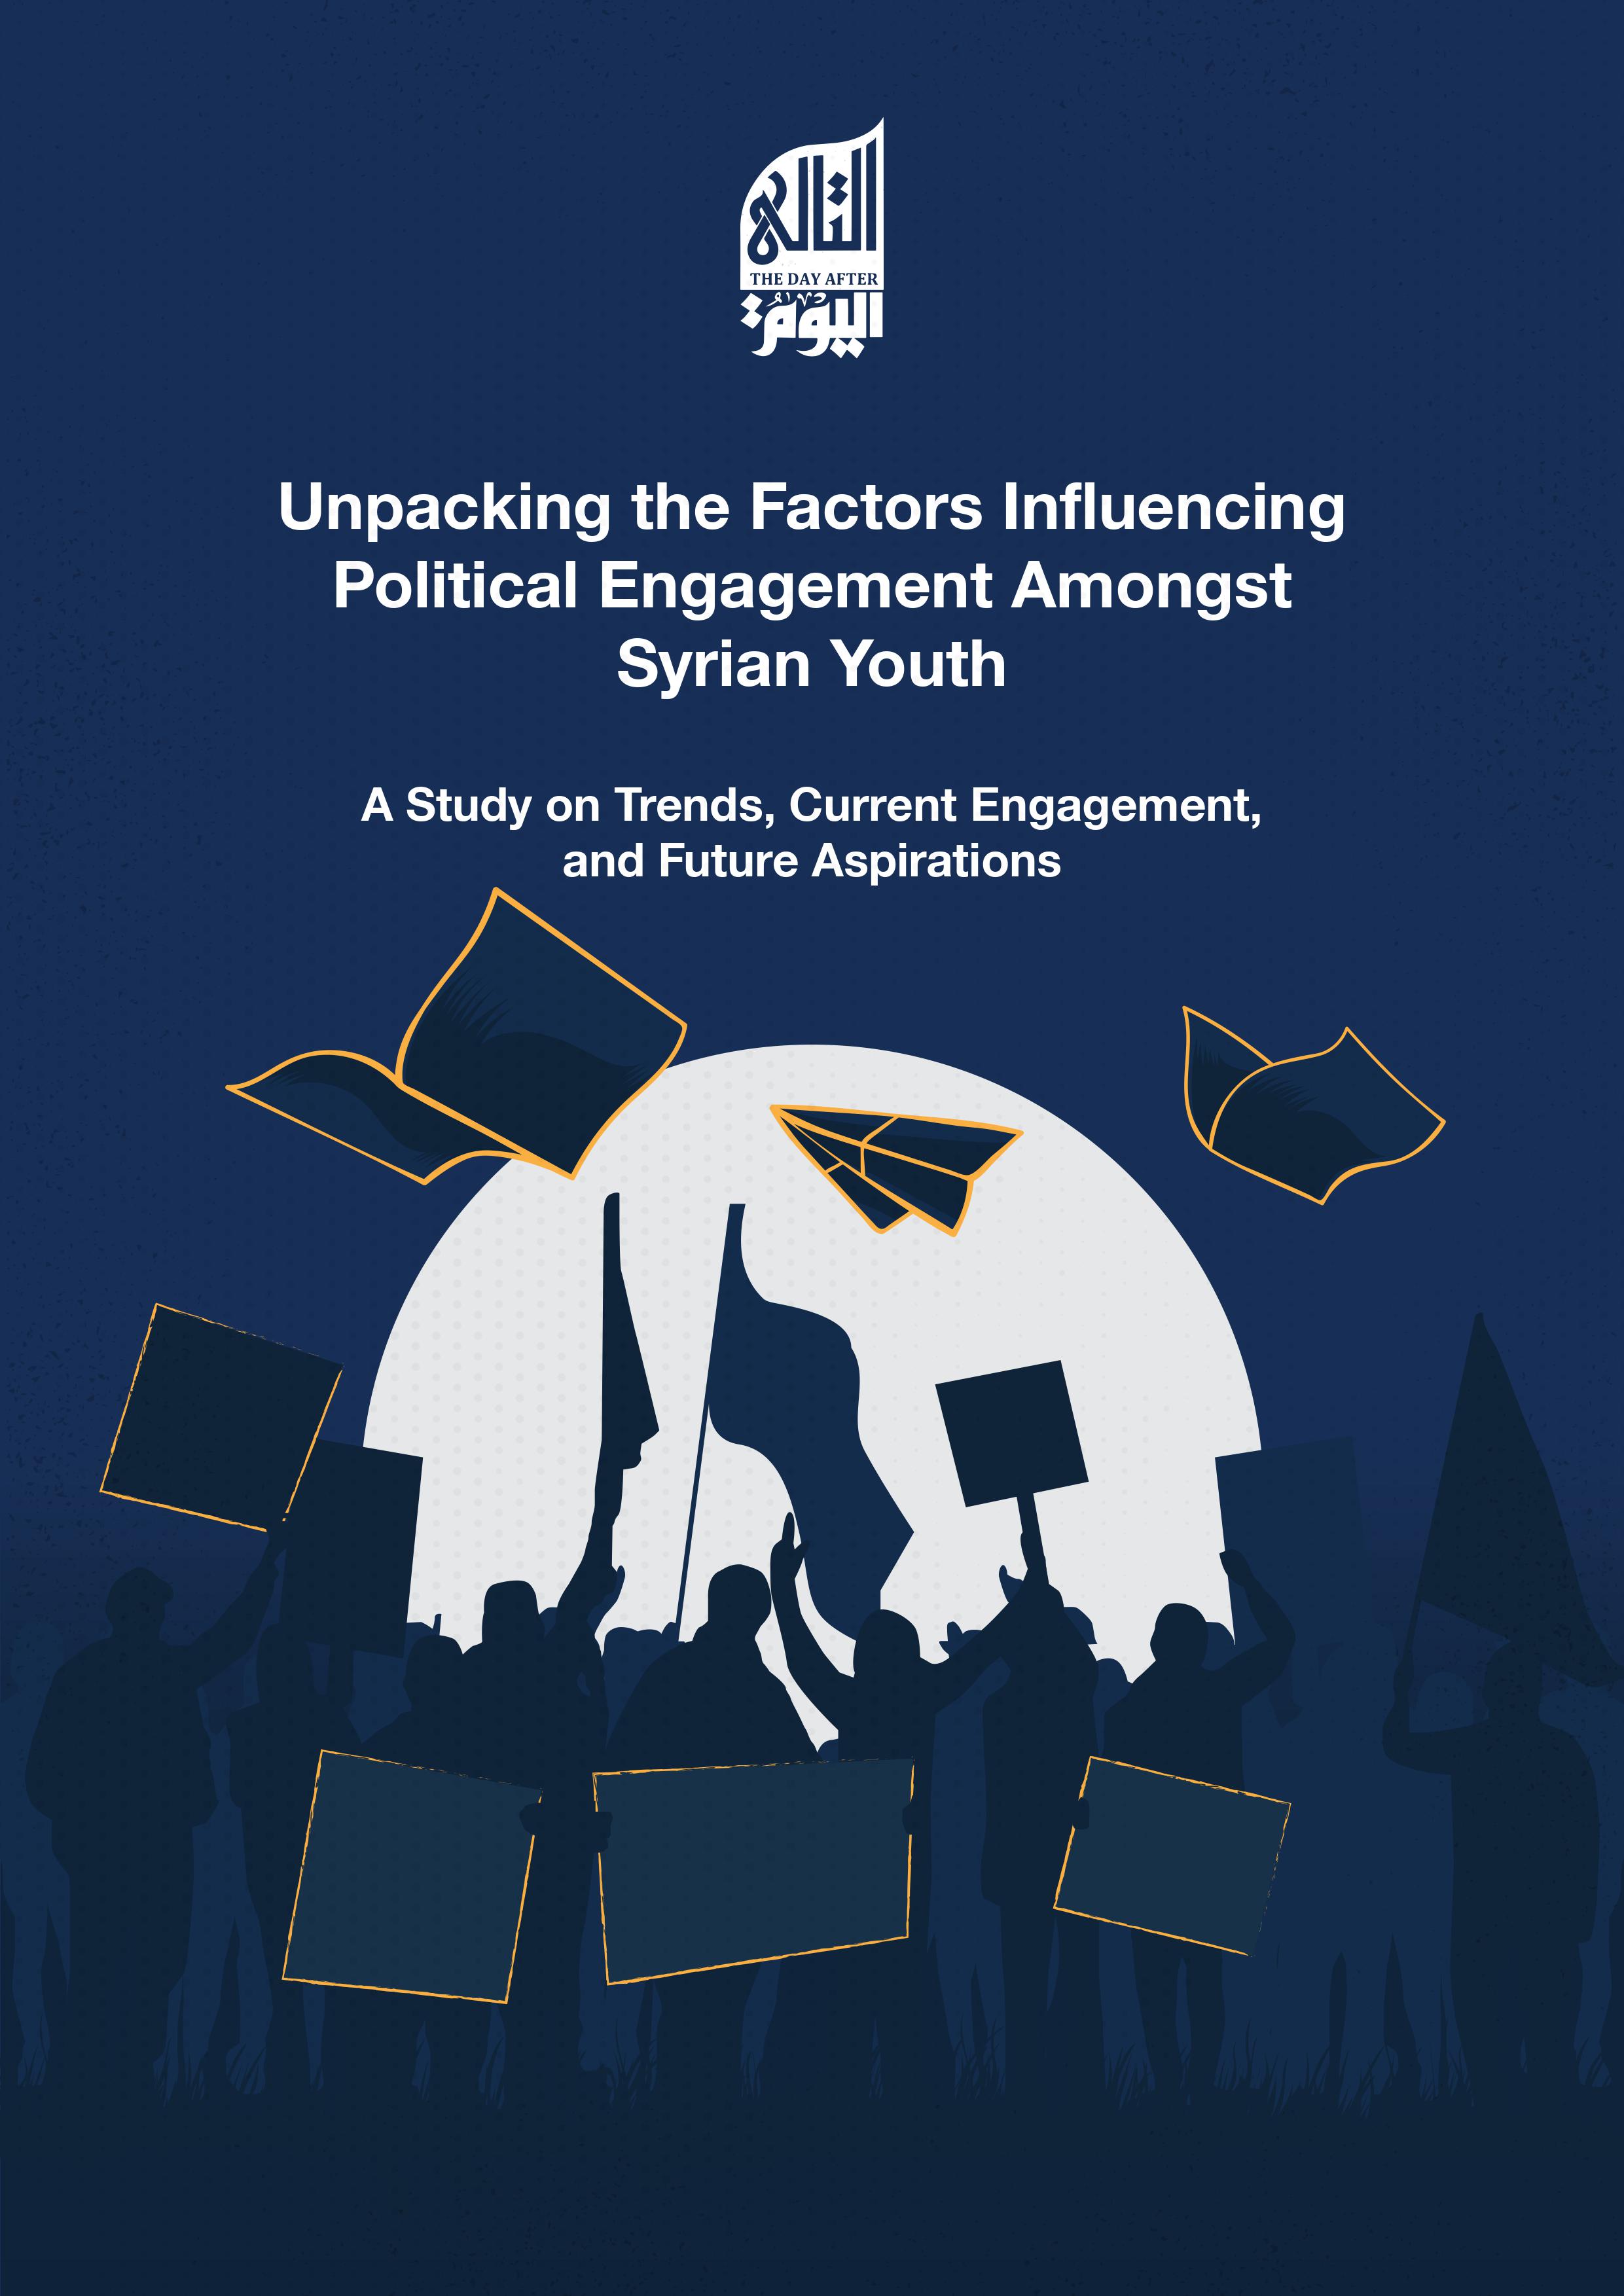 Unpacking the Factors Influencing Political Engagement Amongst Syrian Youth